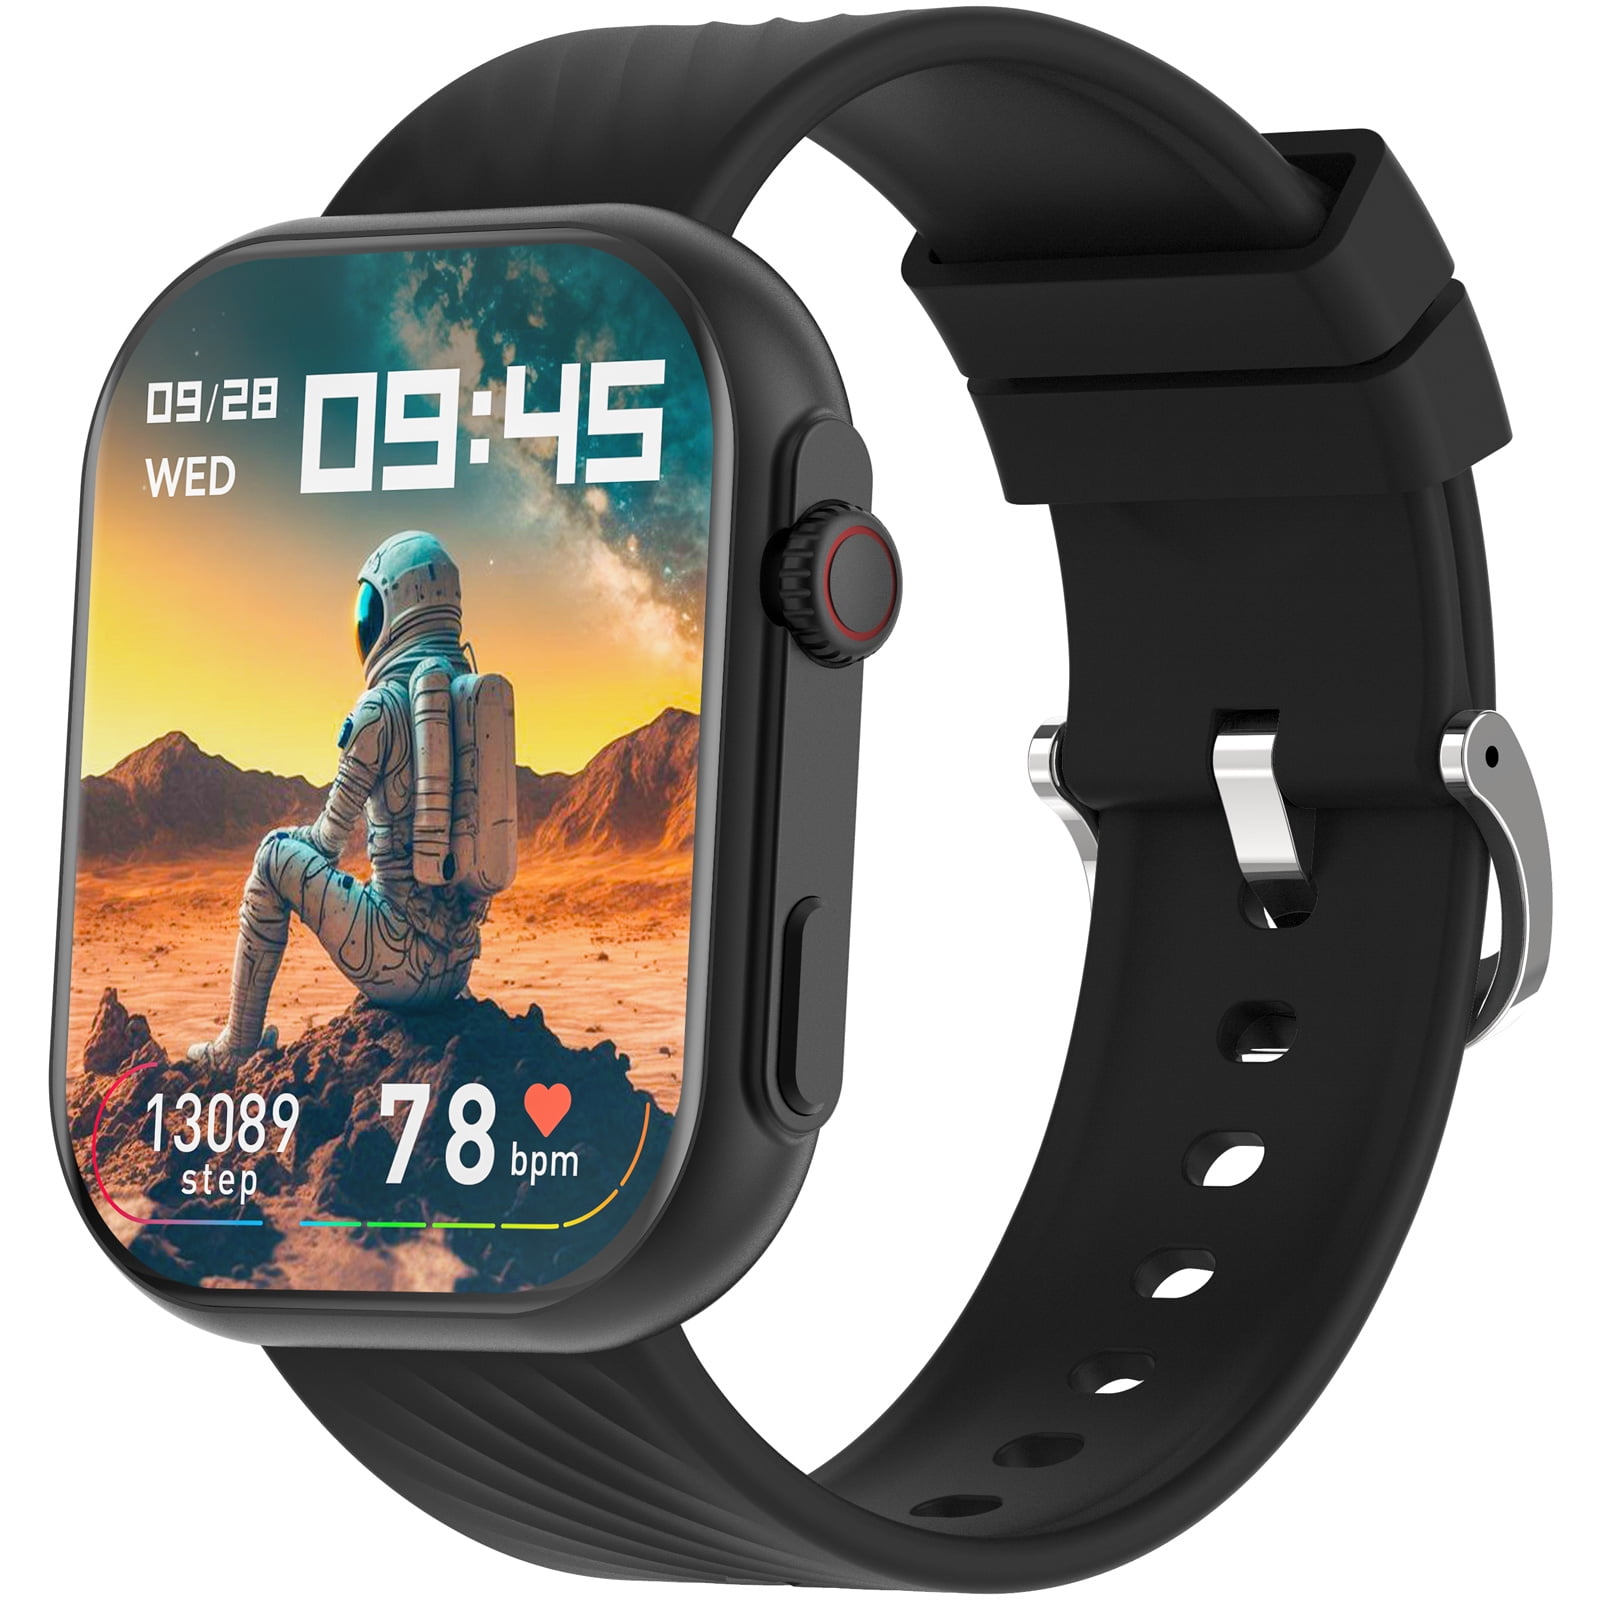 Google Pixel Watch - Android Smartwatch with Activity Tracking 